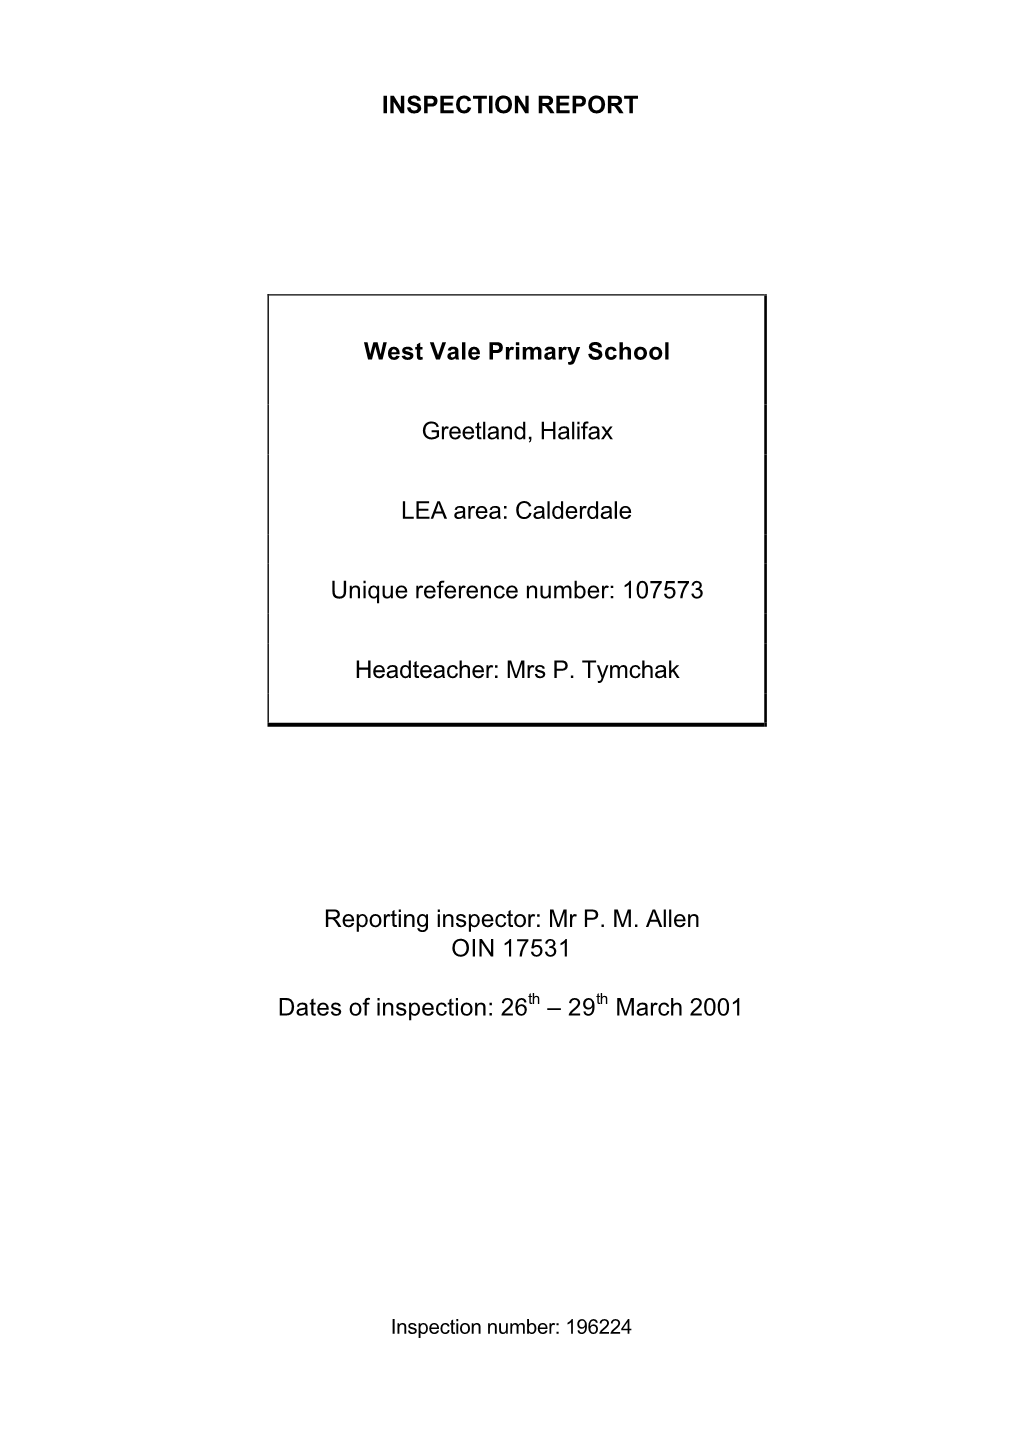 INSPECTION REPORT West Vale Primary School Greetland, Halifax